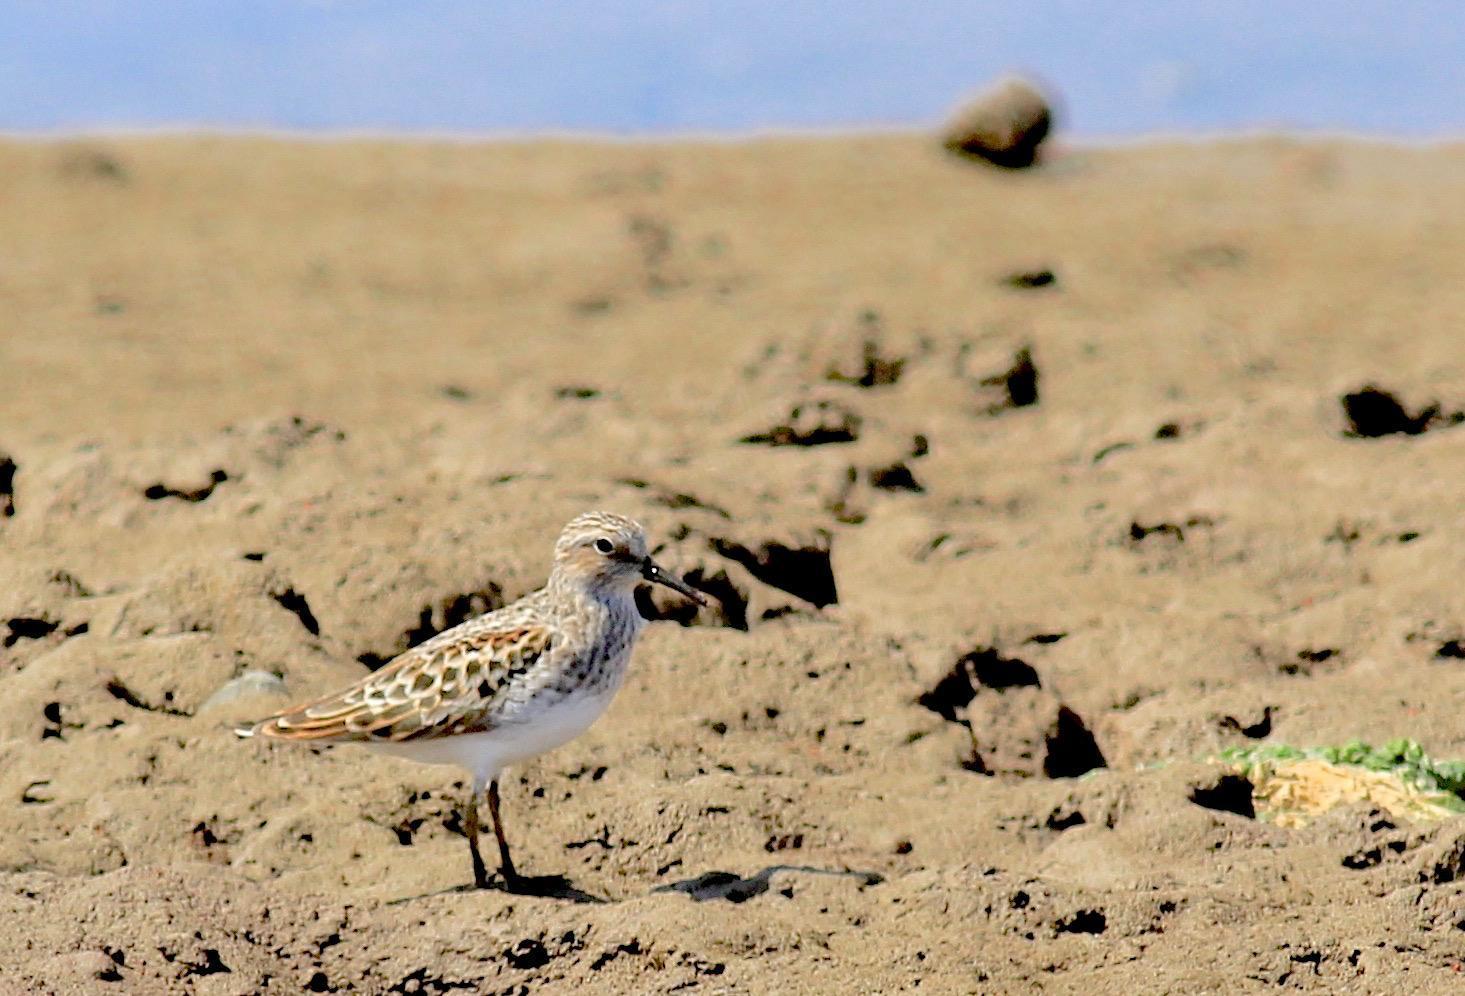 Western Sandpiper Photo by Kathryn Keith